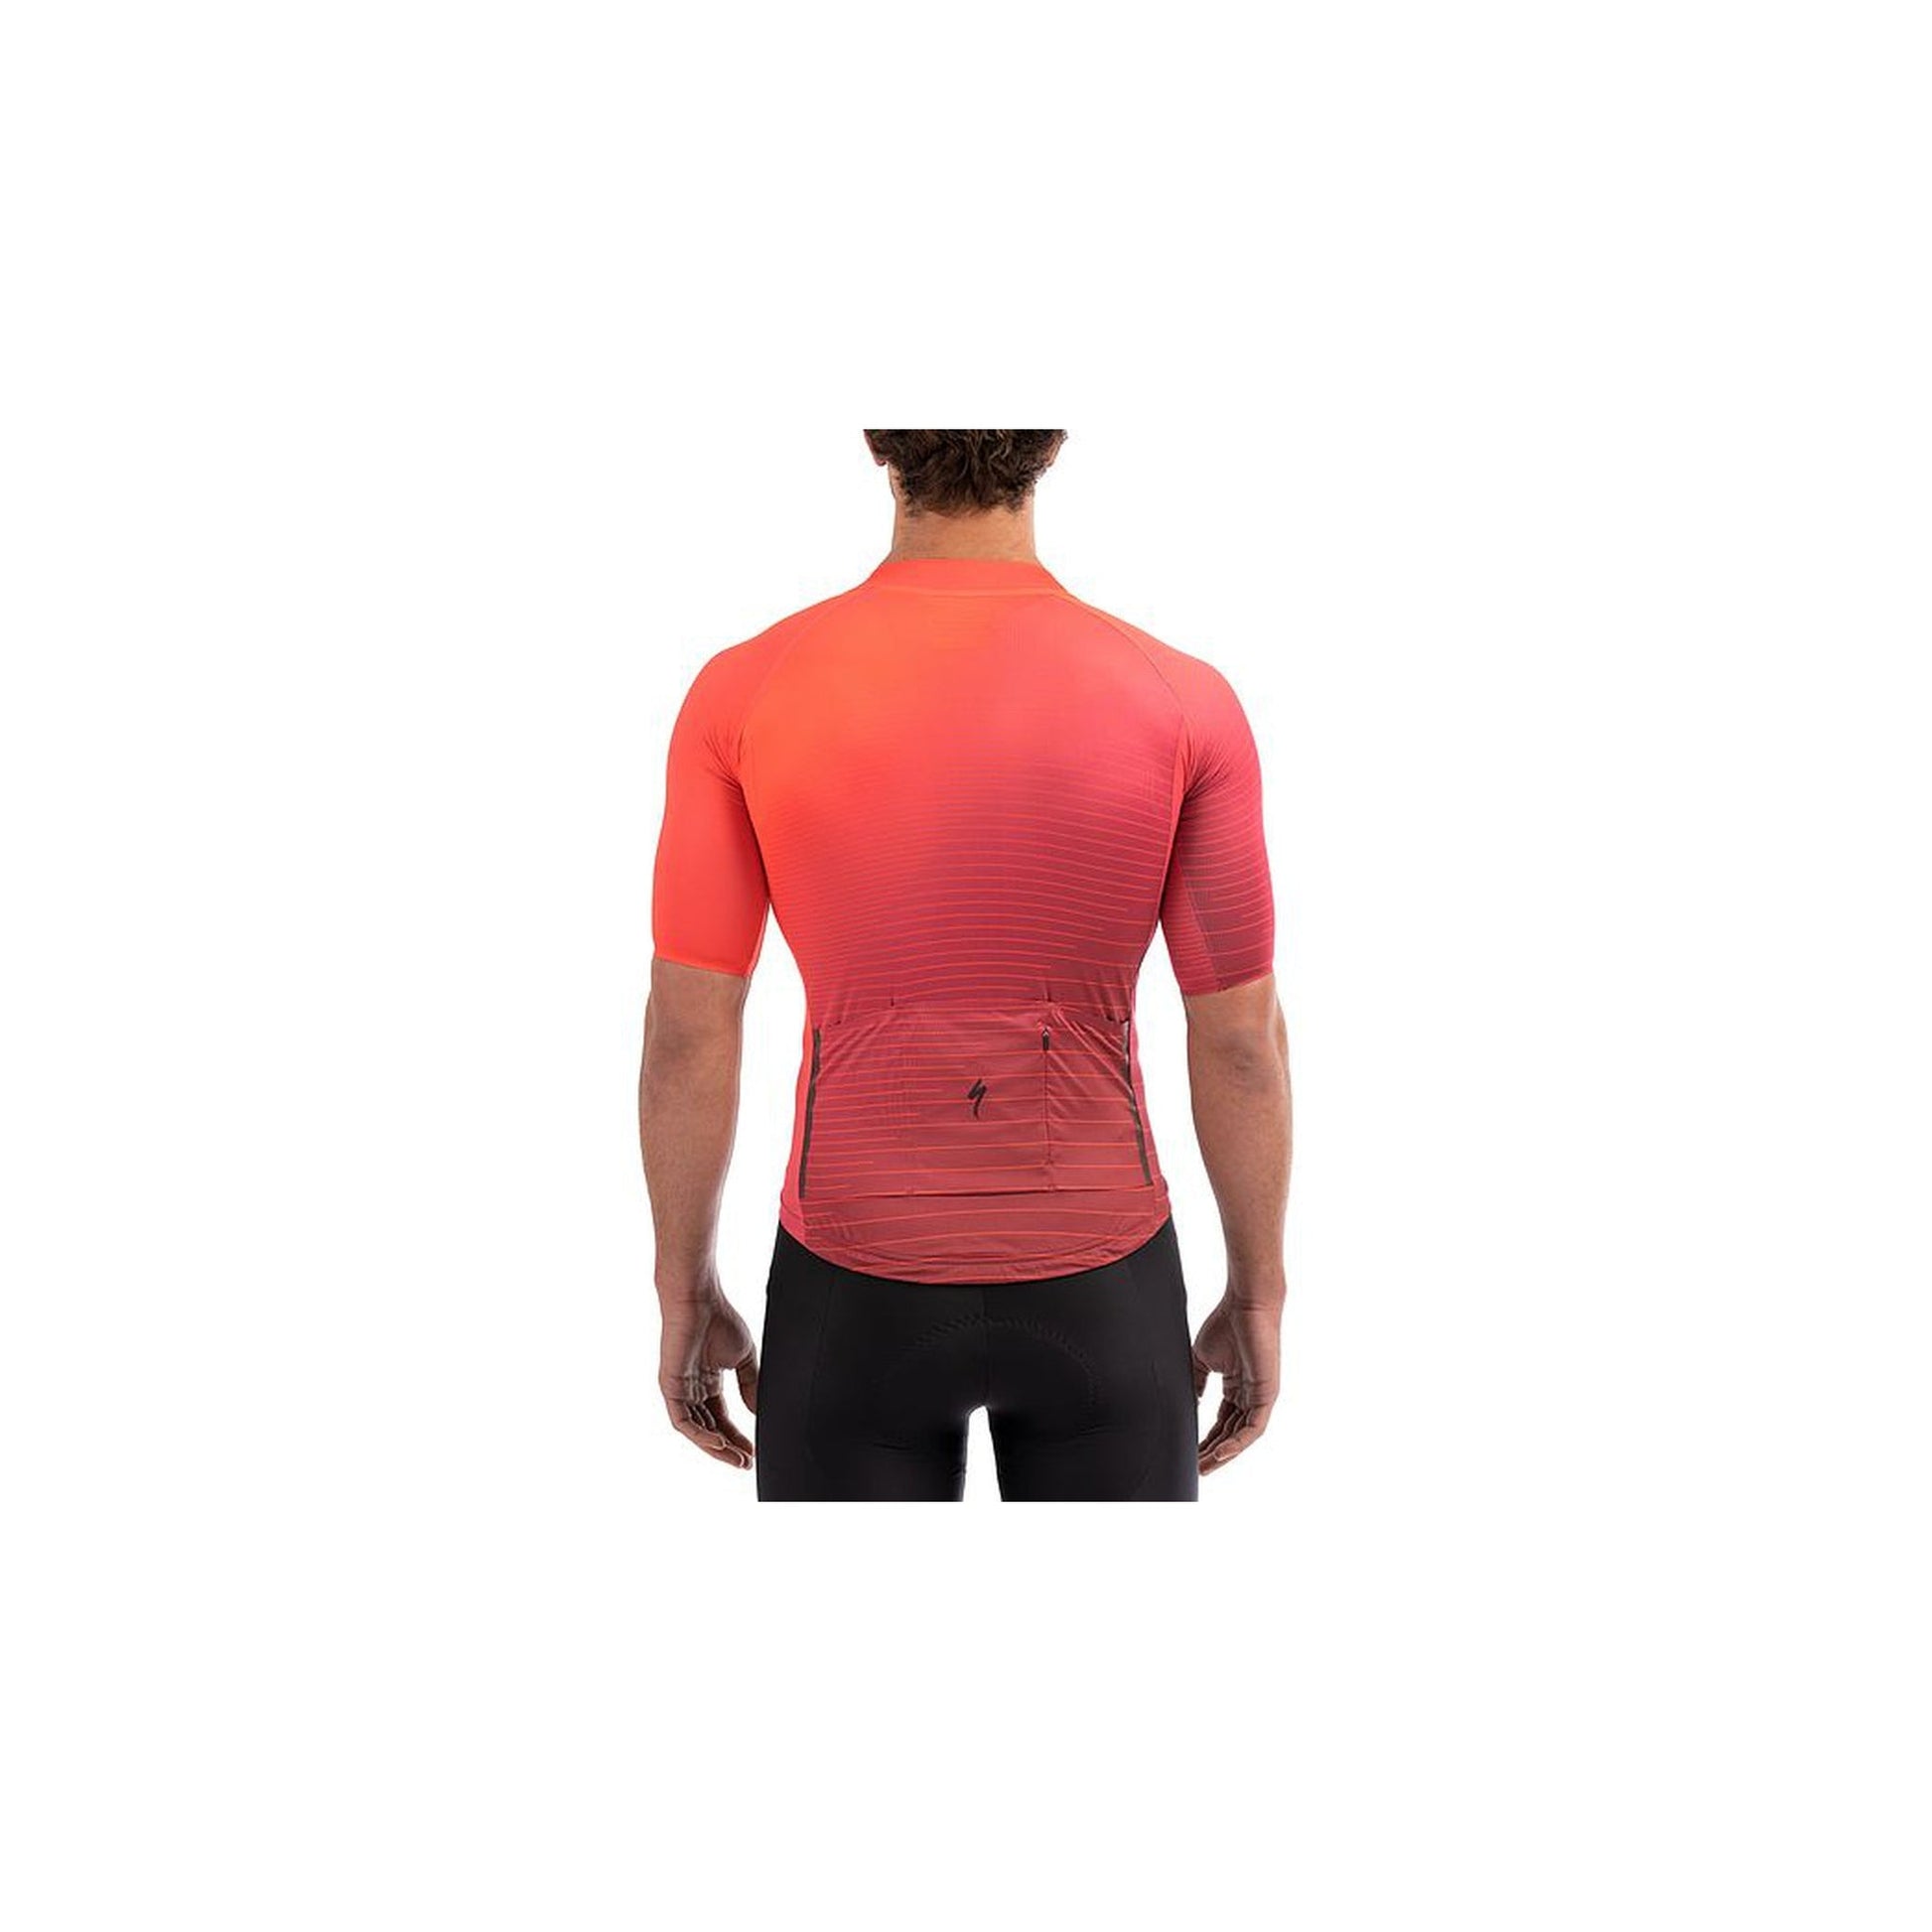 Men's SL Air Jersey-Cycles Direct Specialized